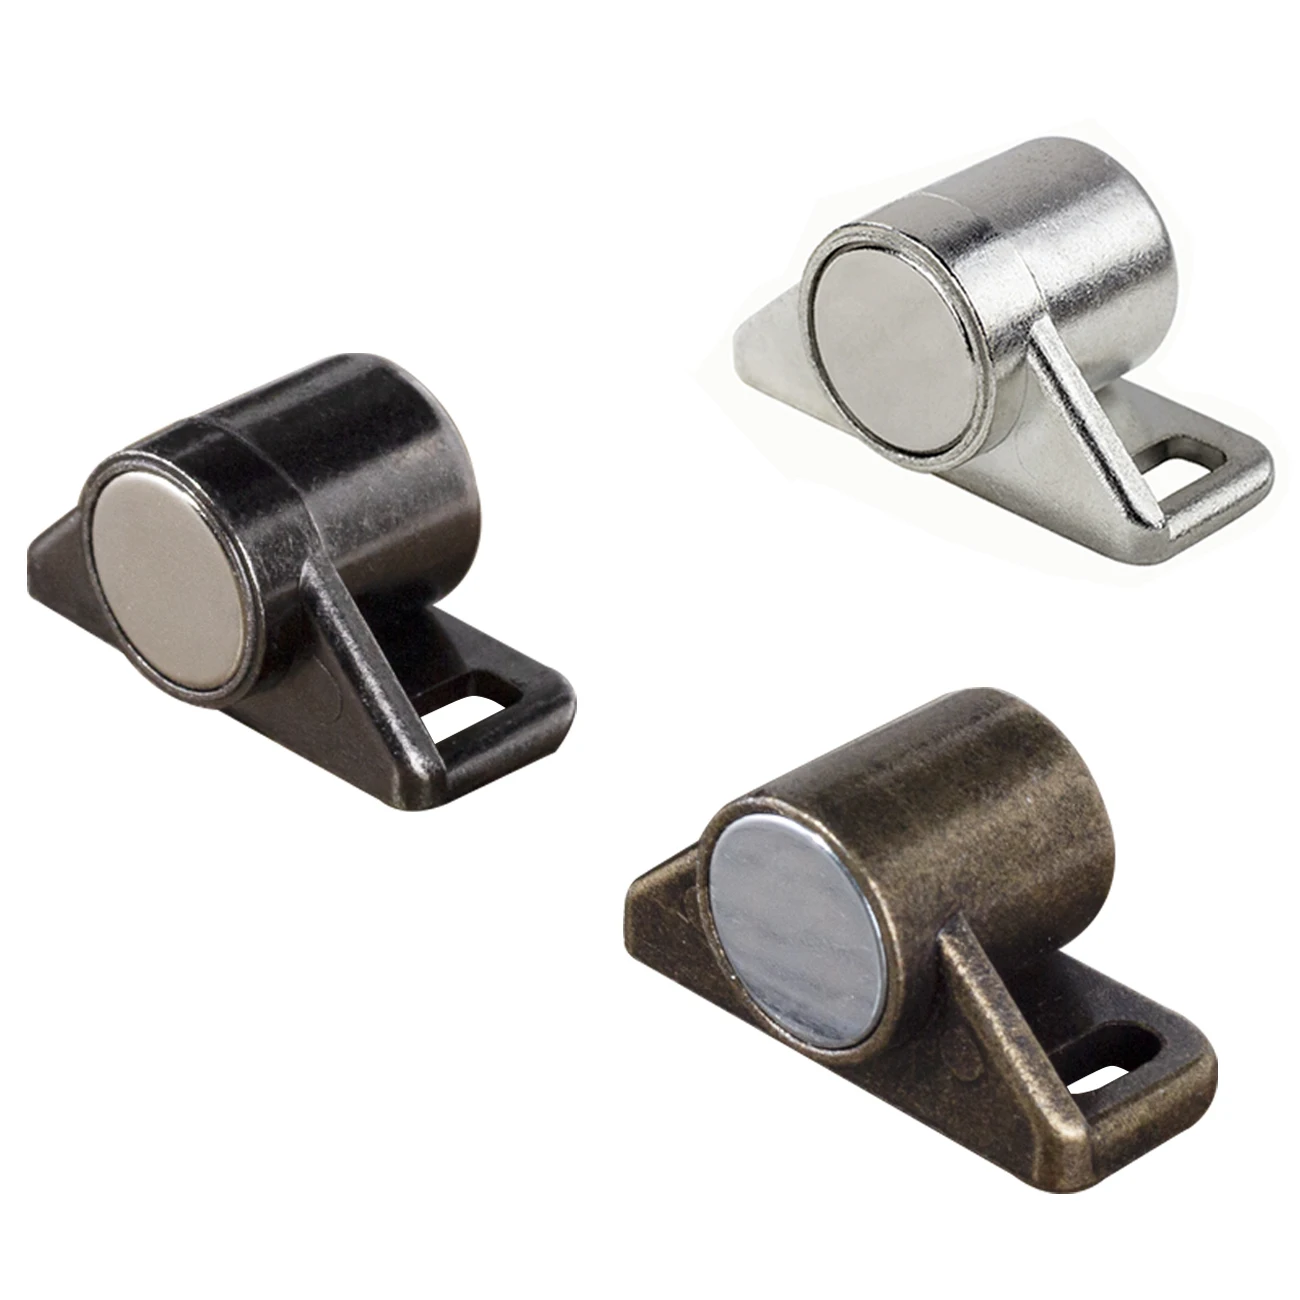 Stainless Steel Door Magnetic Catch Magnet Latch Closure